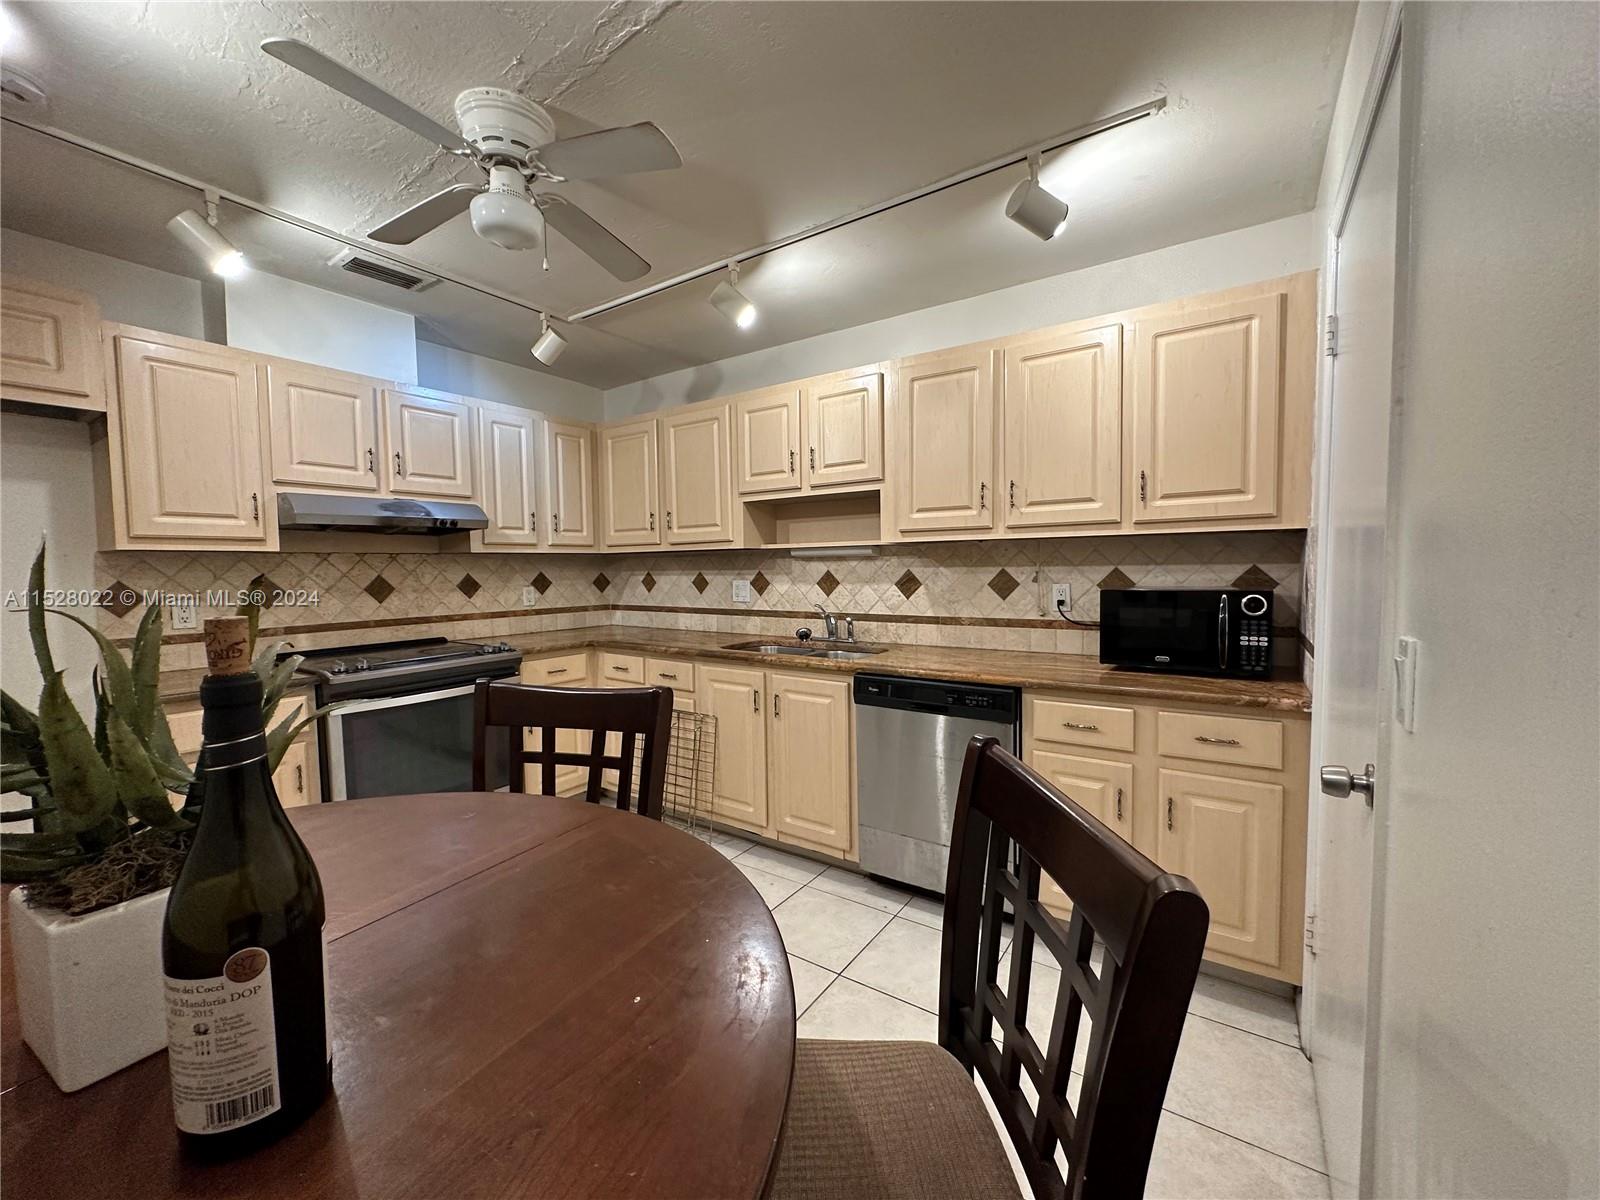 a kitchen with stainless steel appliances granite countertop a stove a sink dishwasher a refrigerator a stove and white cabinets with wooden floor